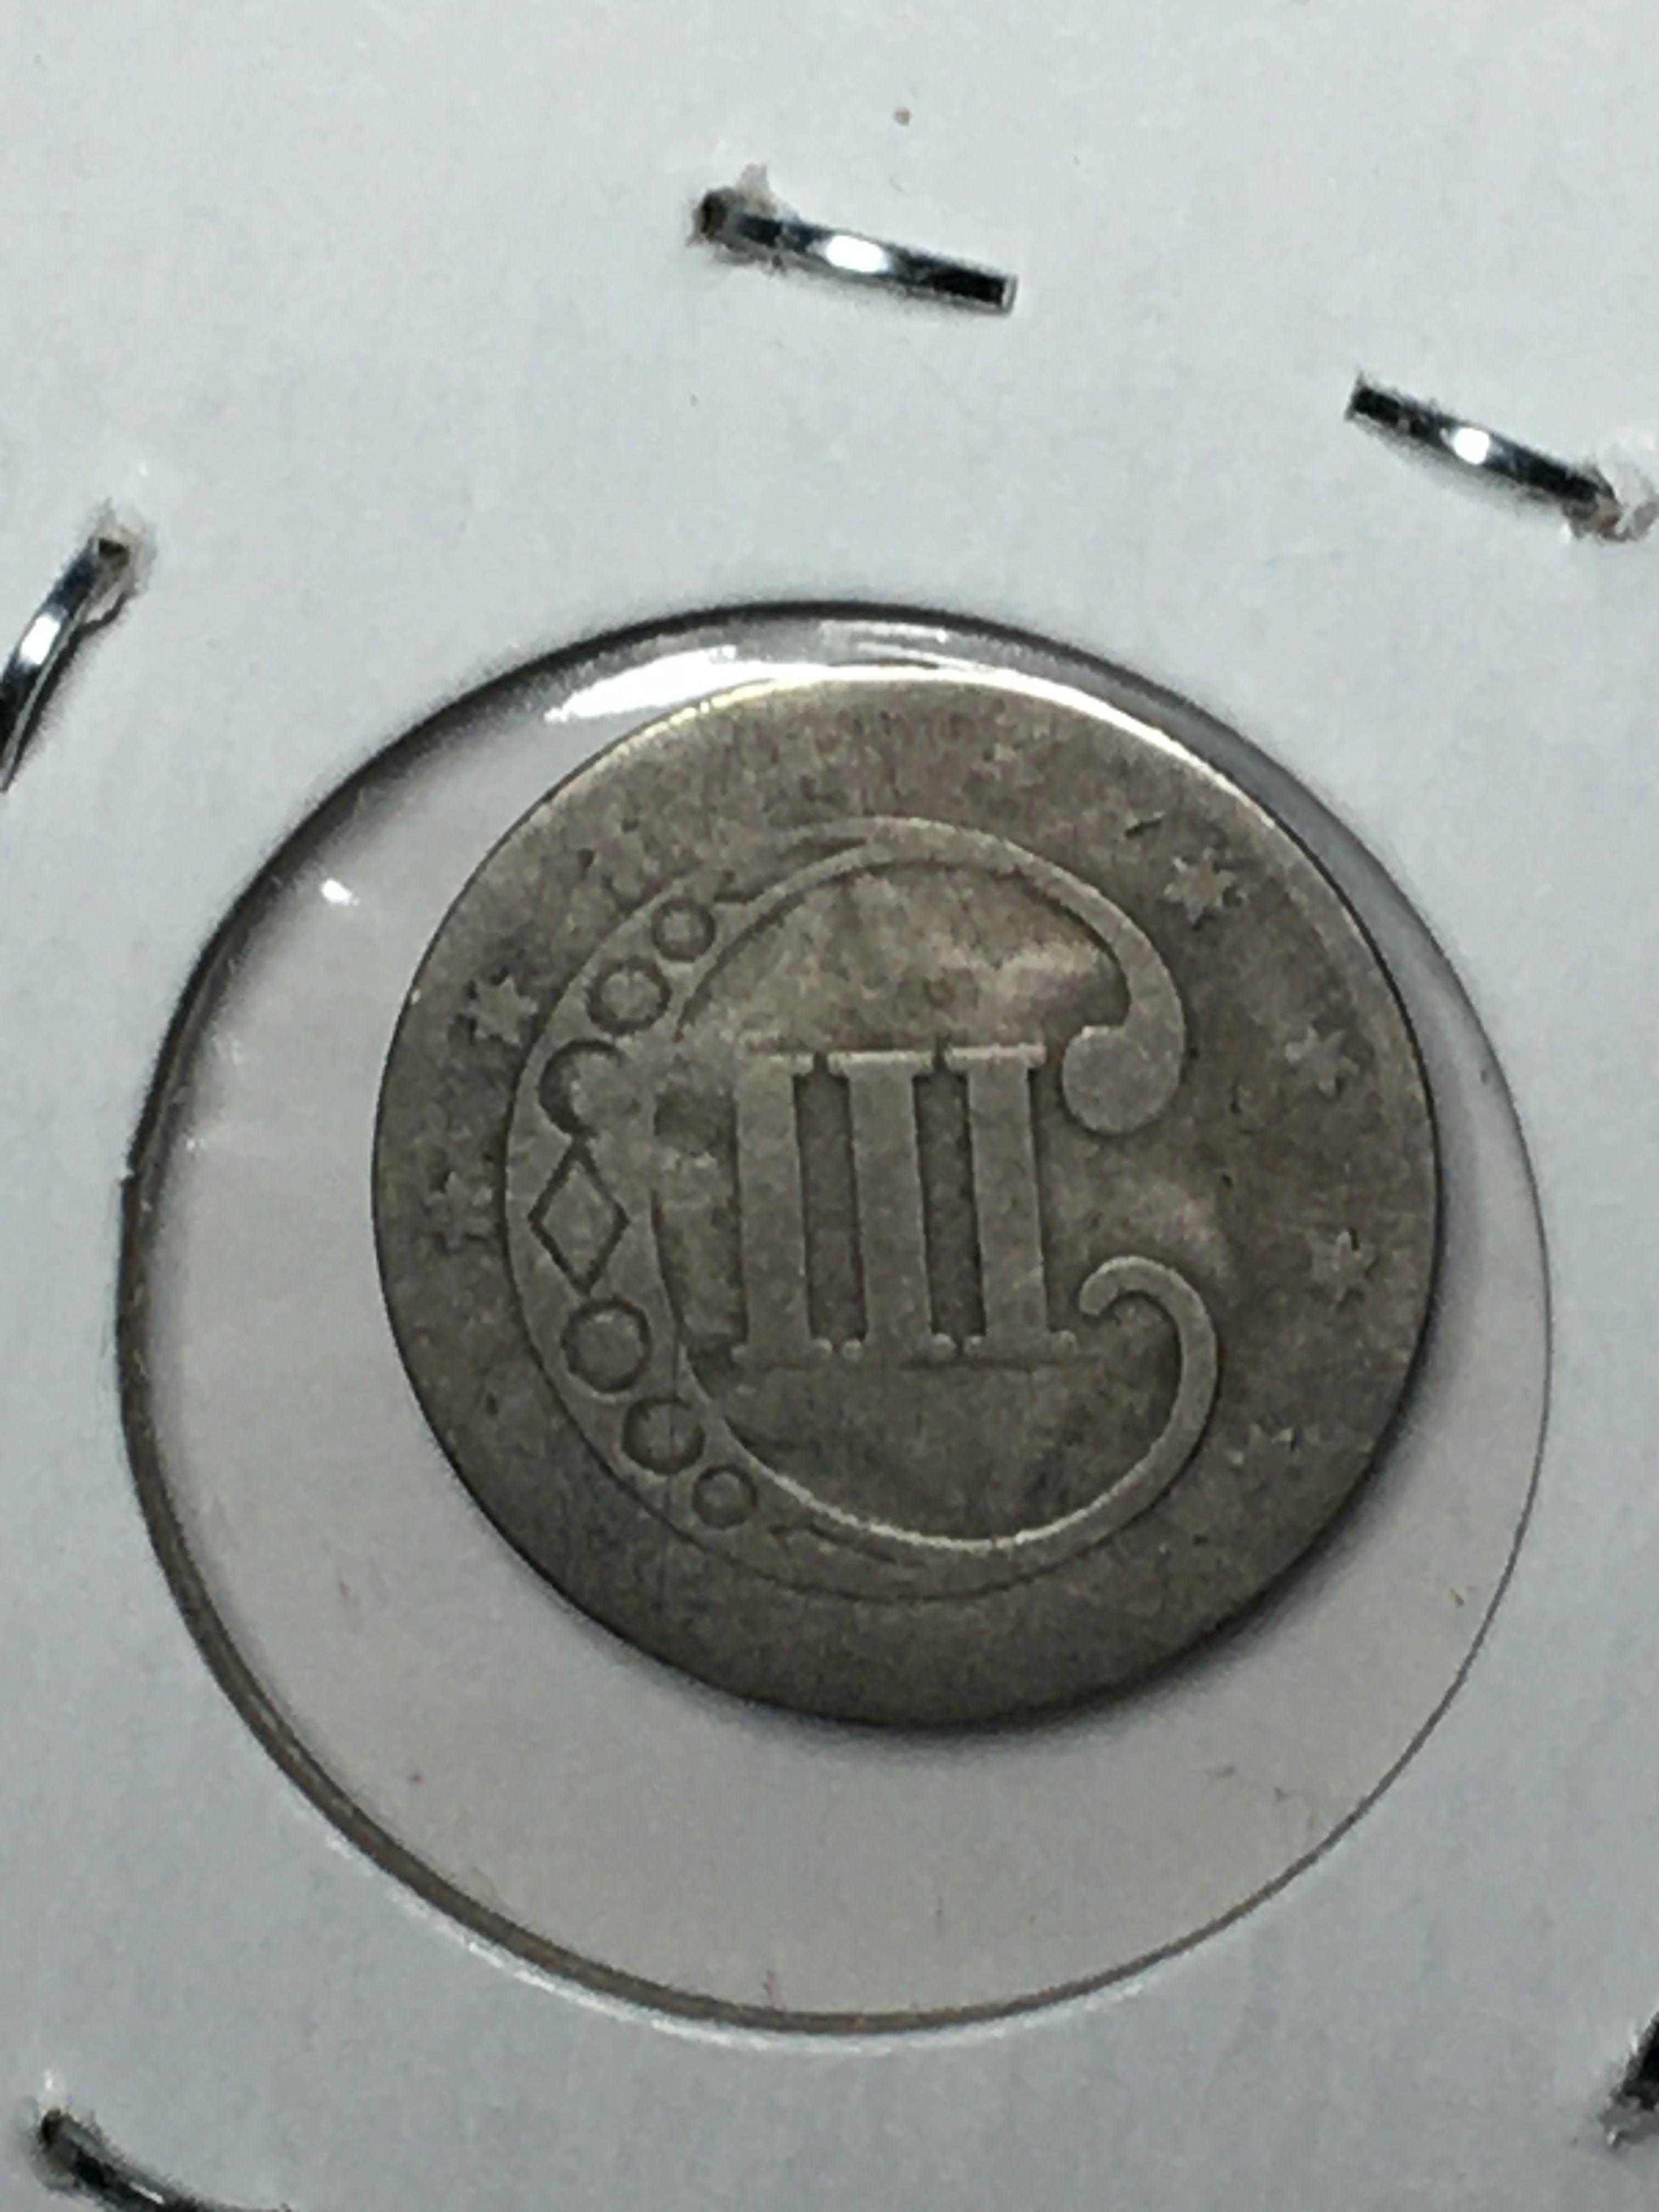 1853 3 Cent Silver